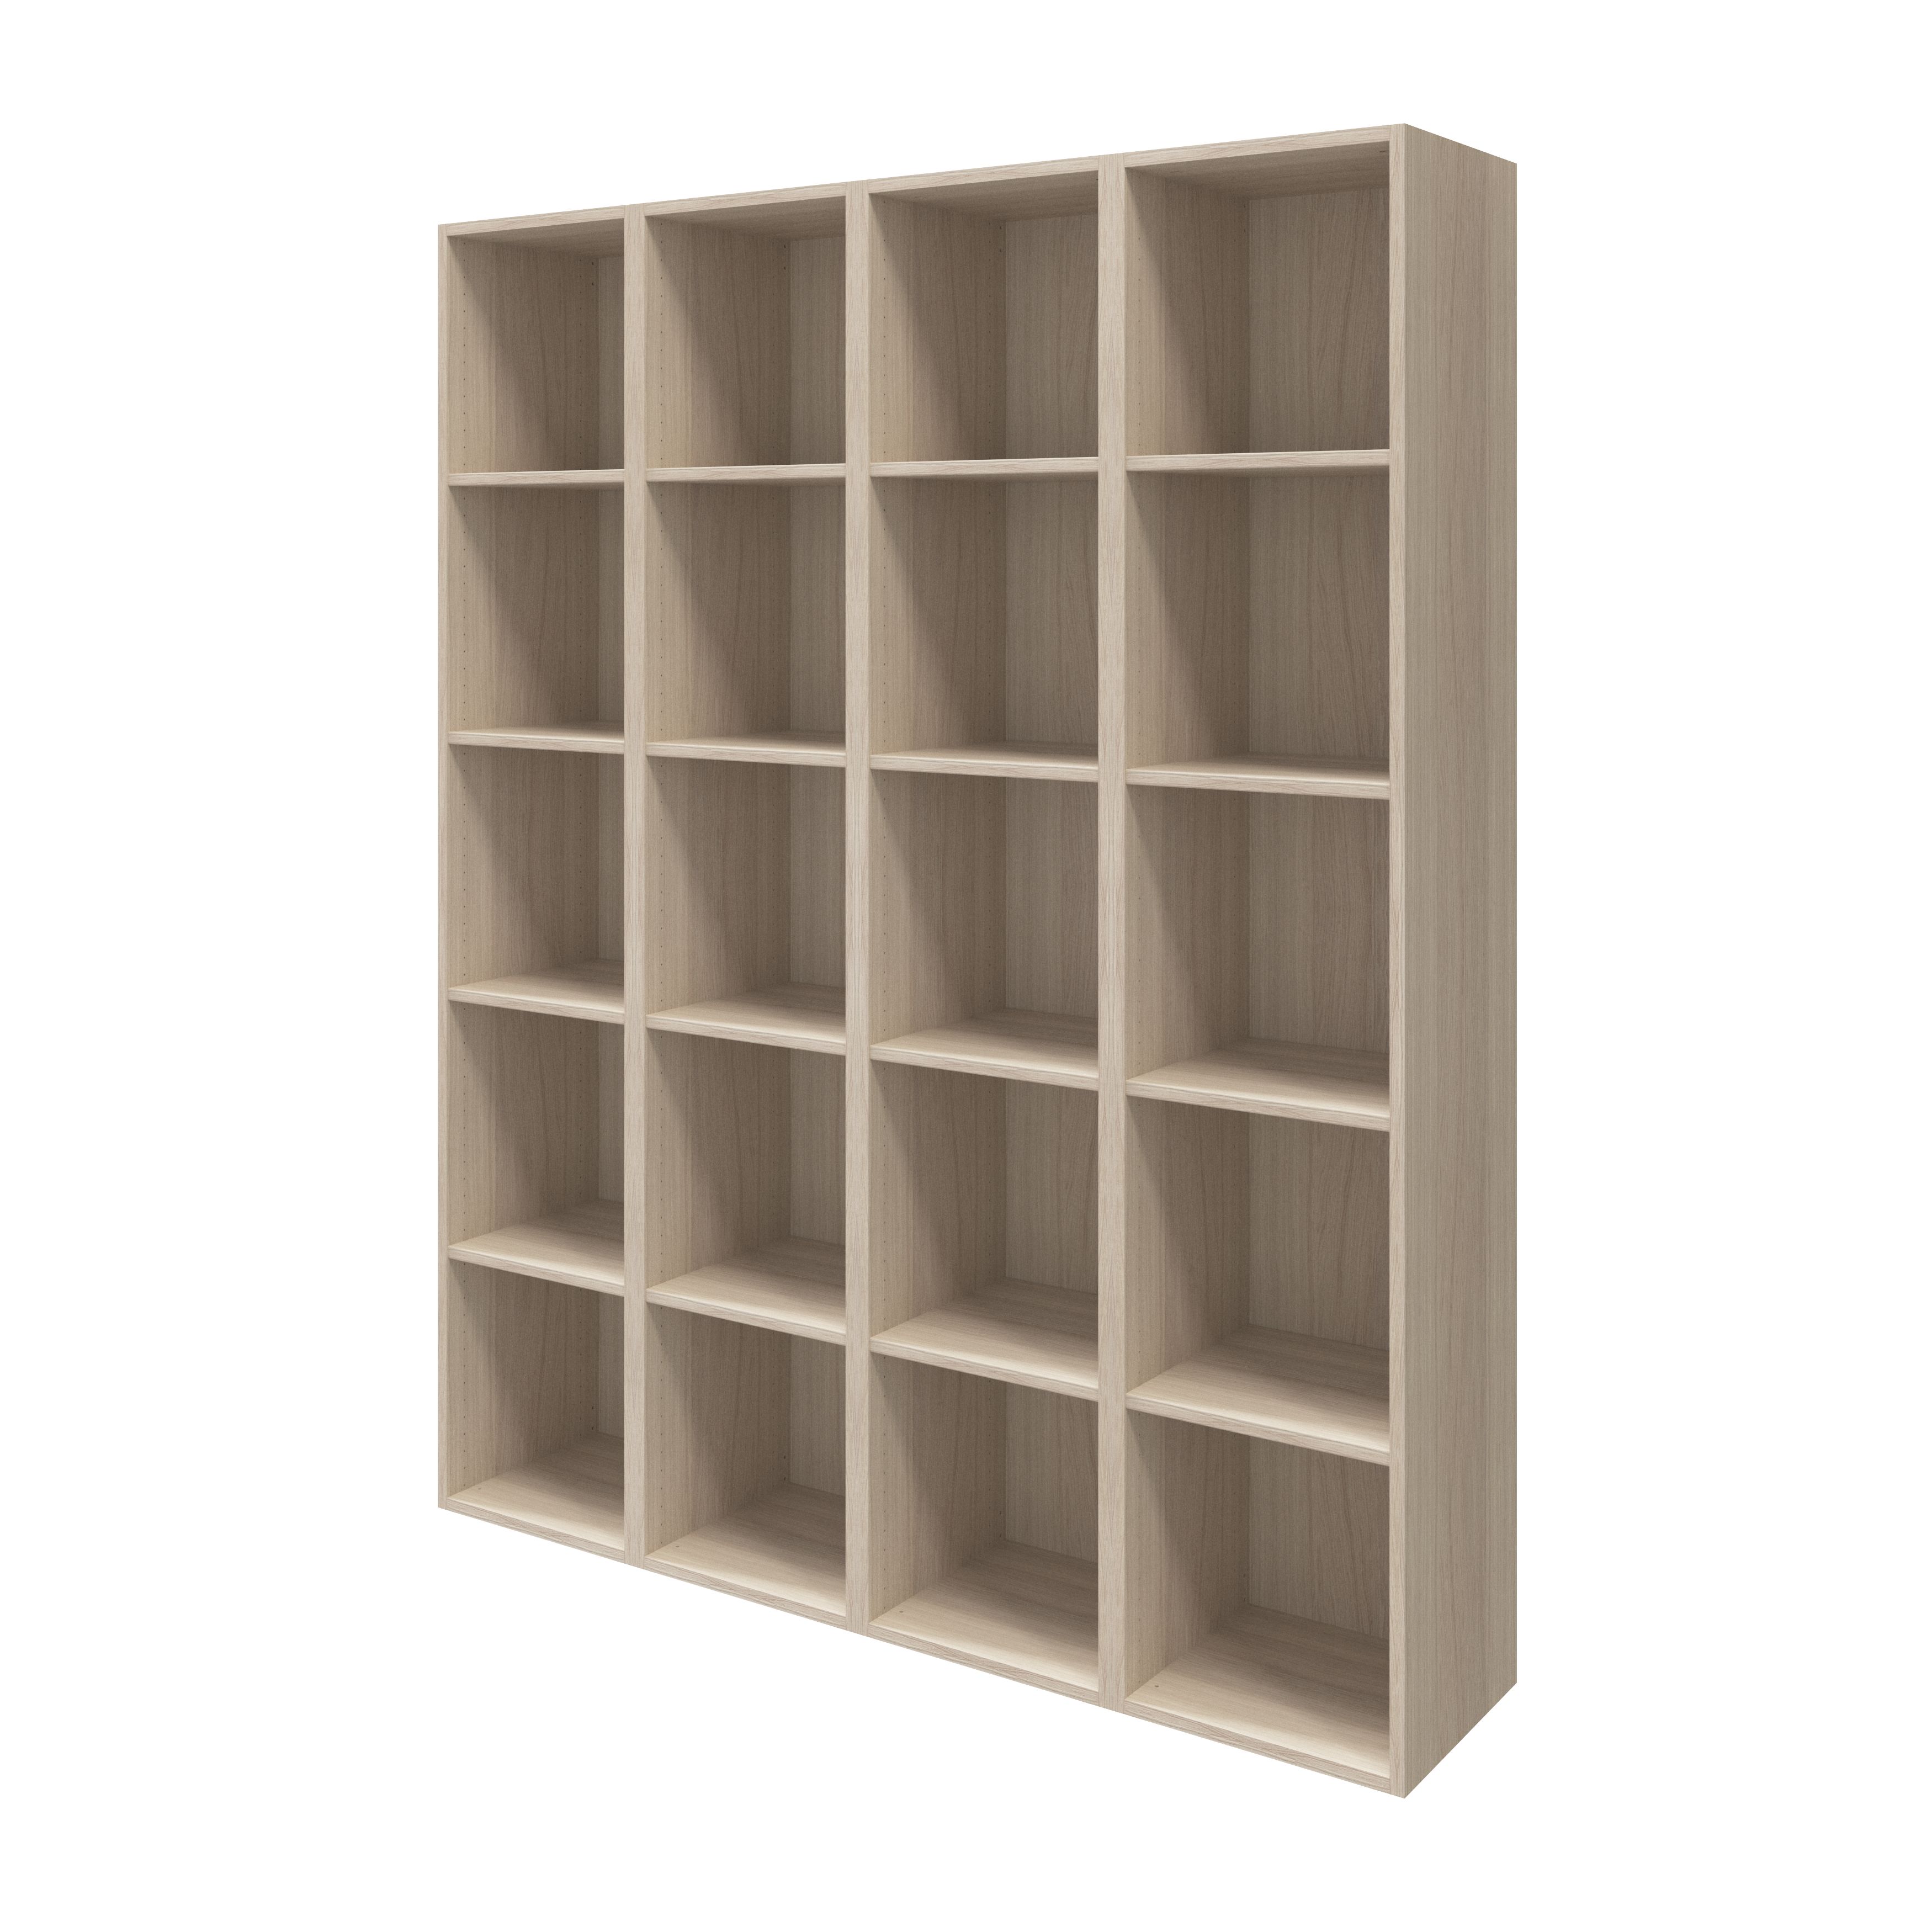 GoodHome Atomia Freestanding Oak effect Large Bookcases, shelving units & display cabinets (H)1875mm